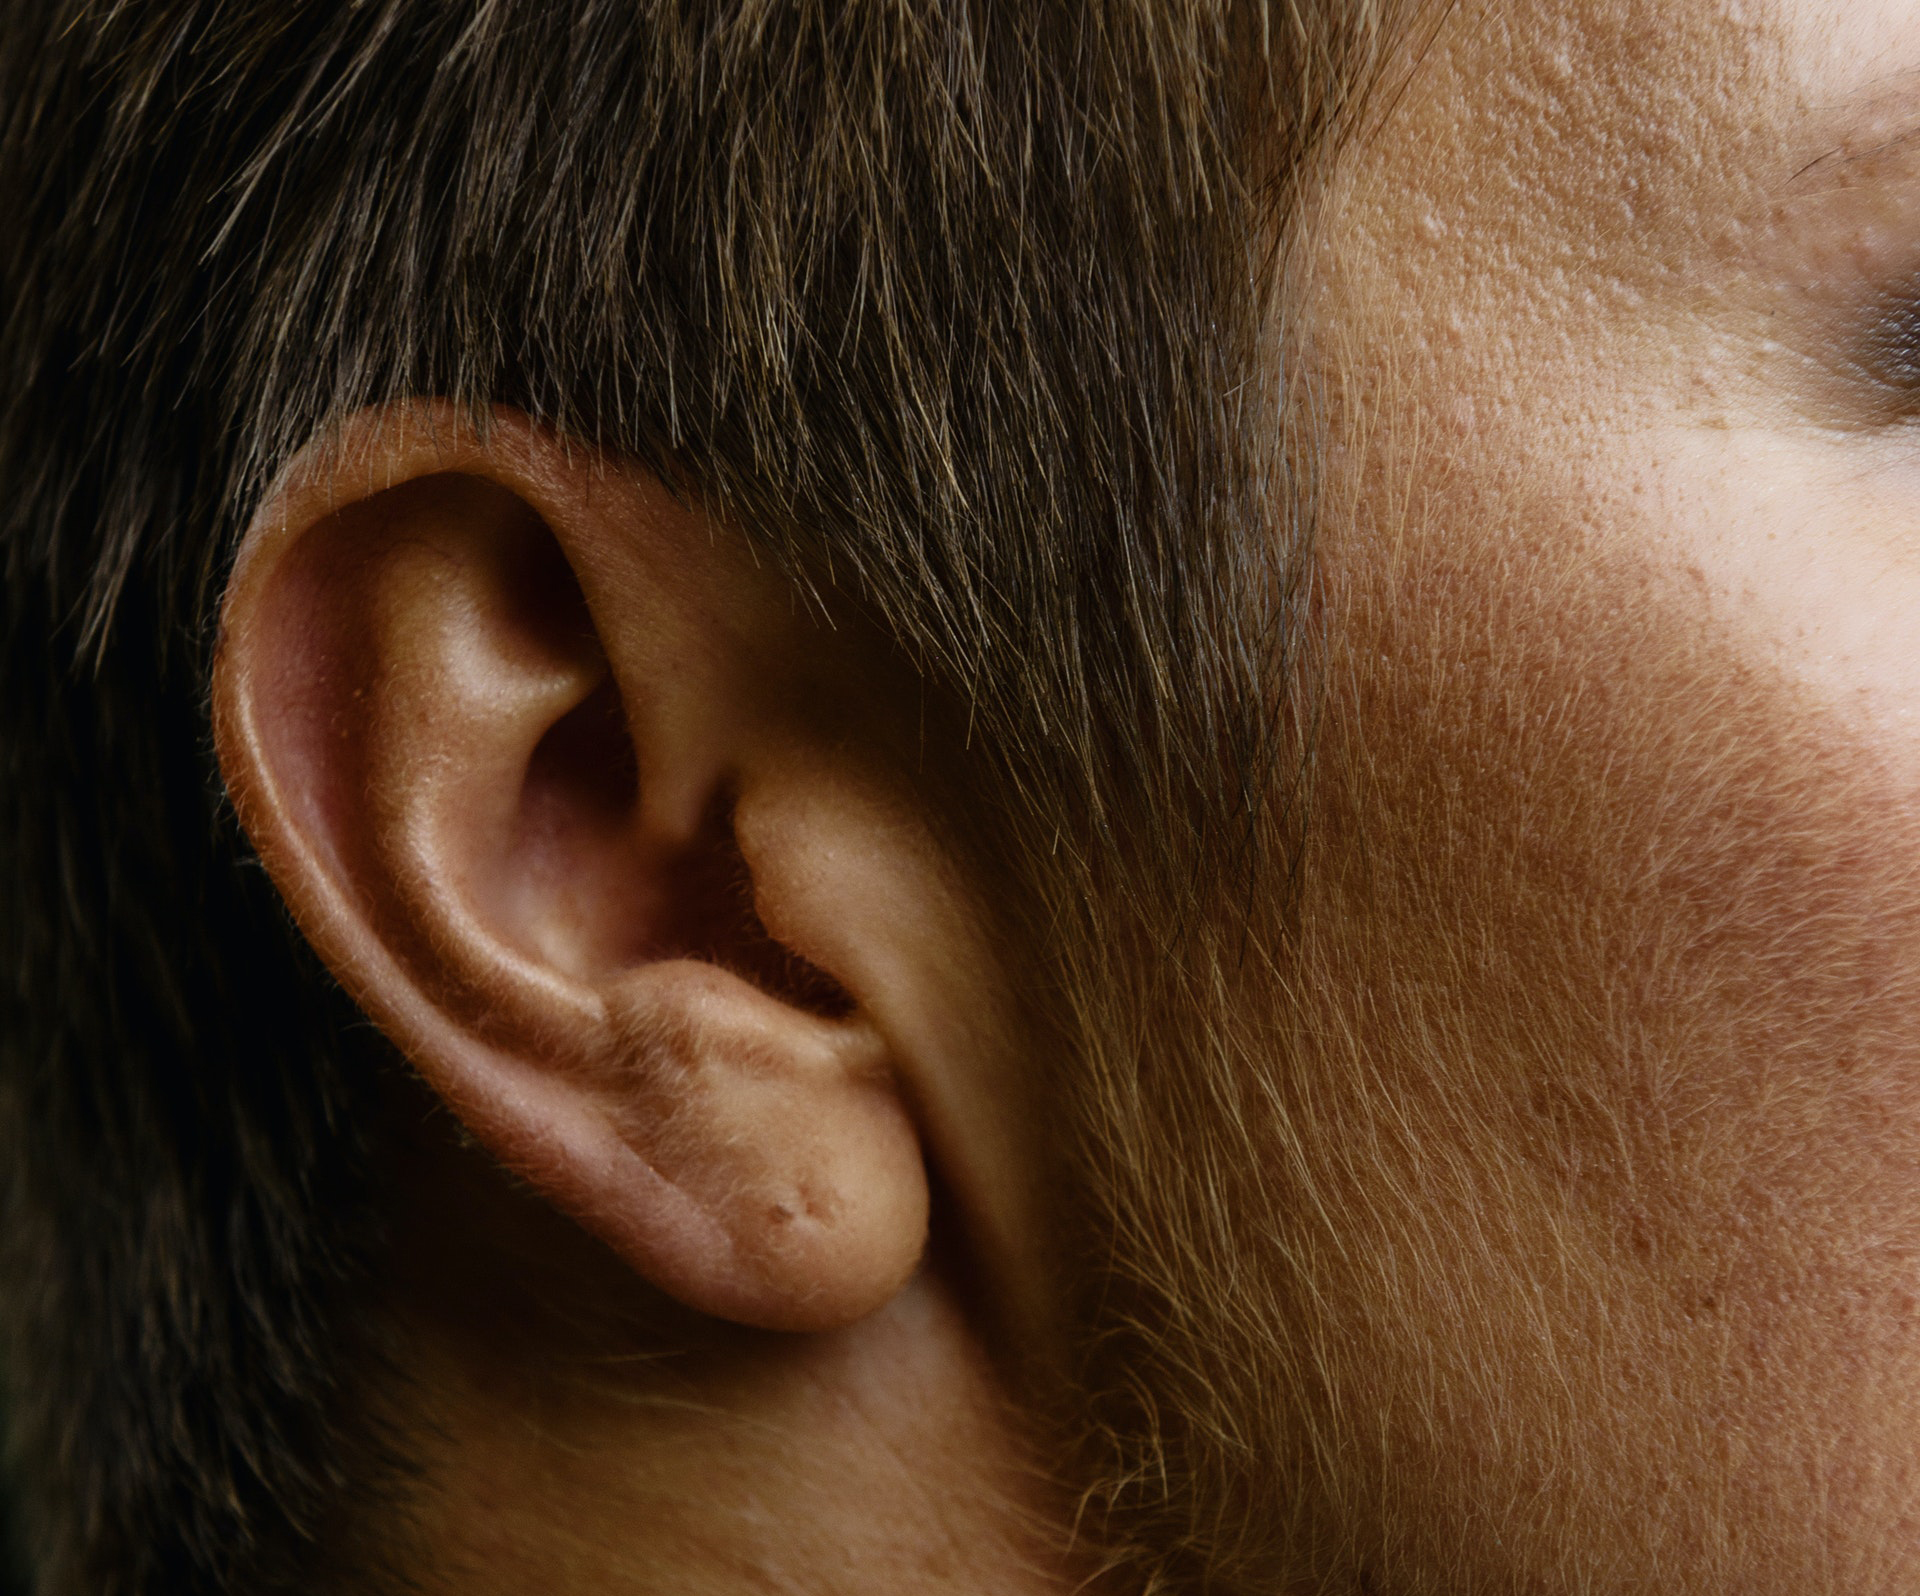 close up of a man's ear